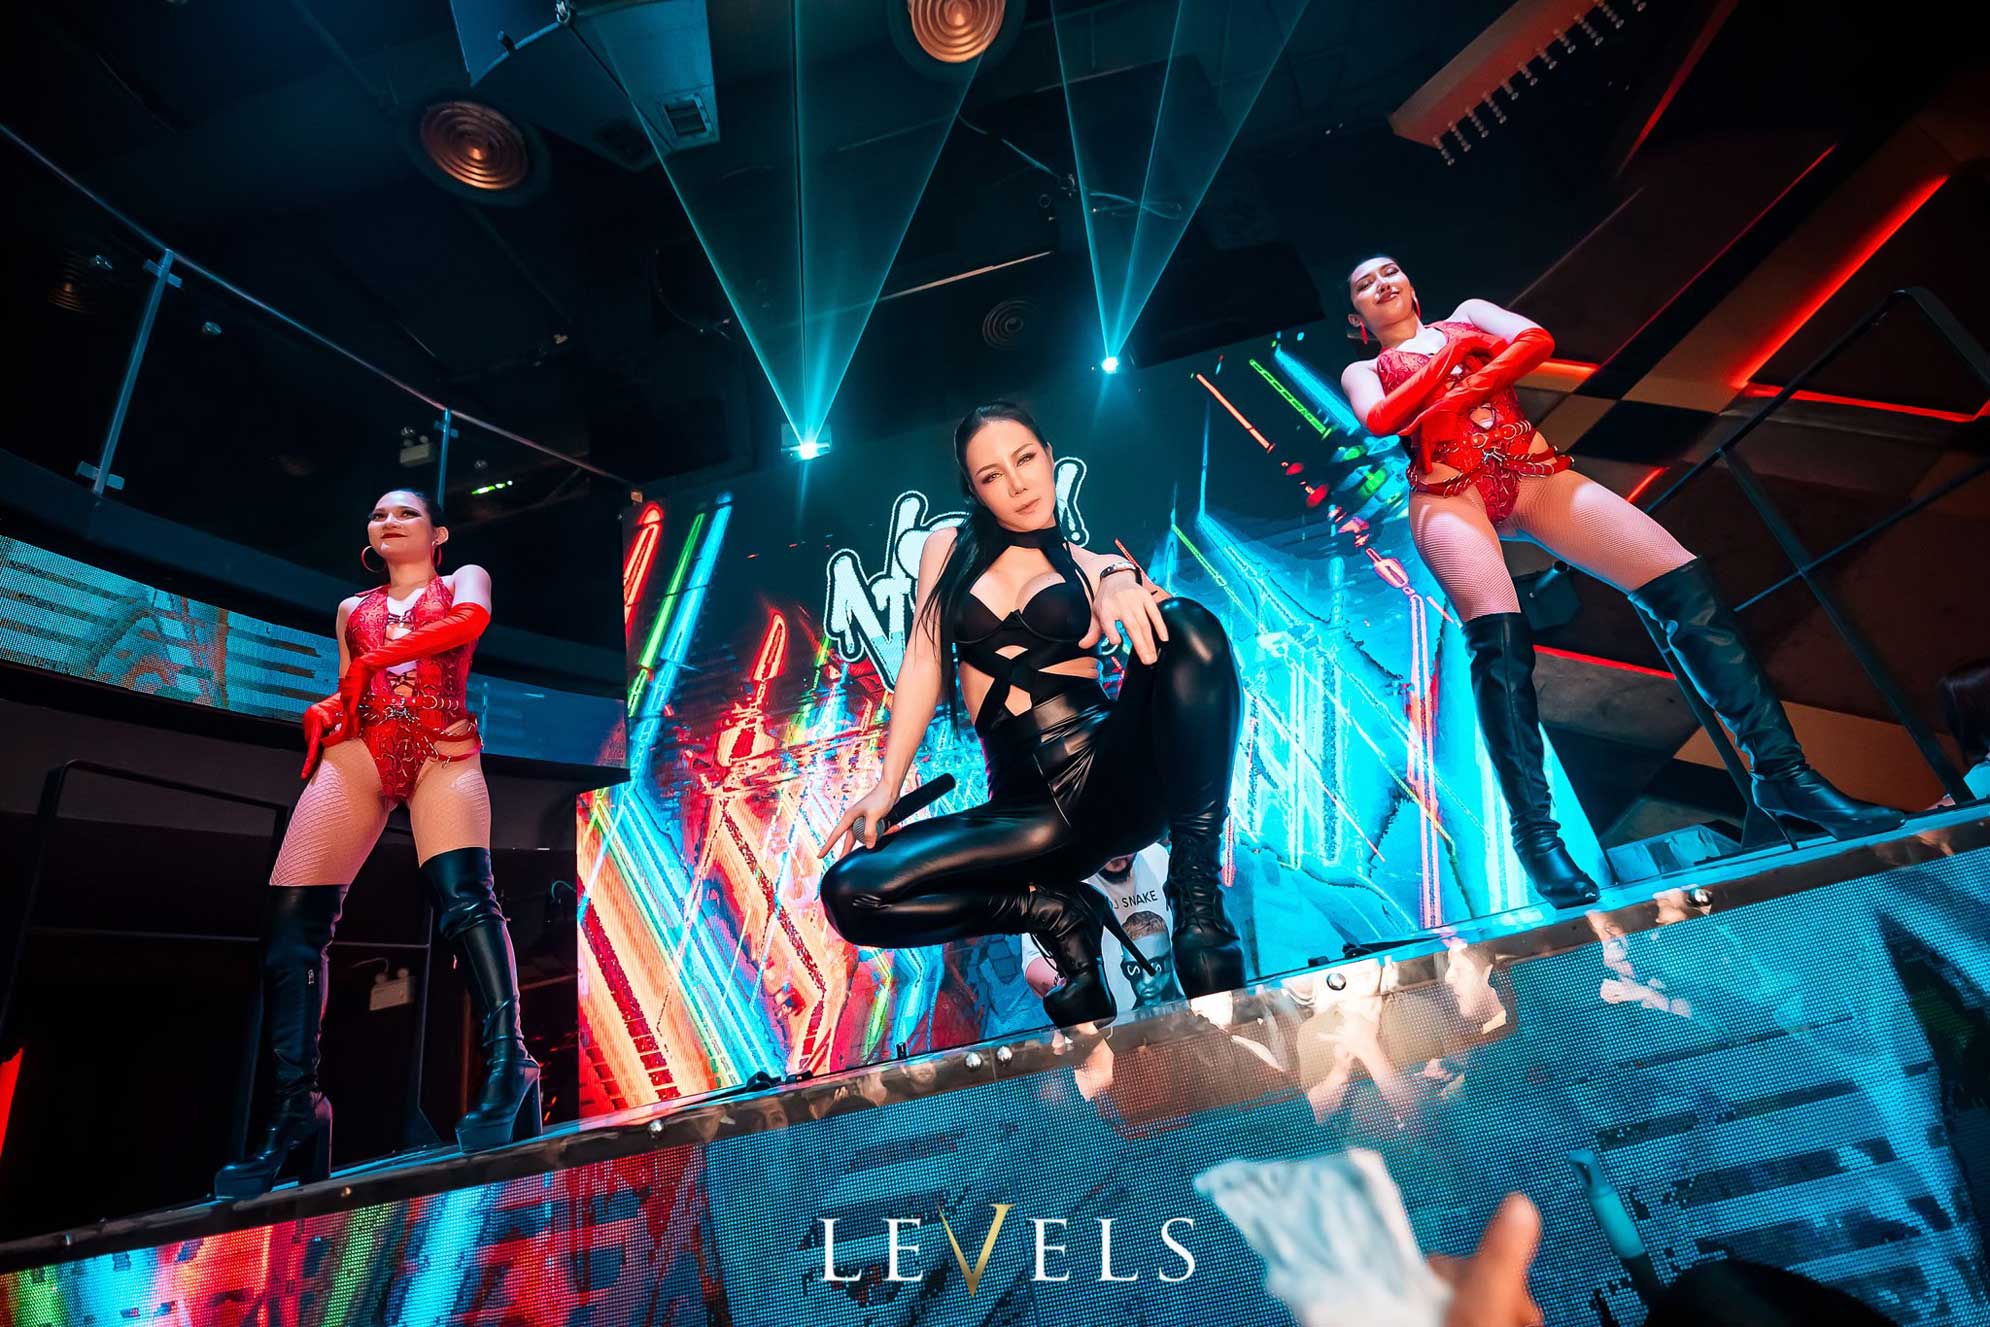 Levels bookings